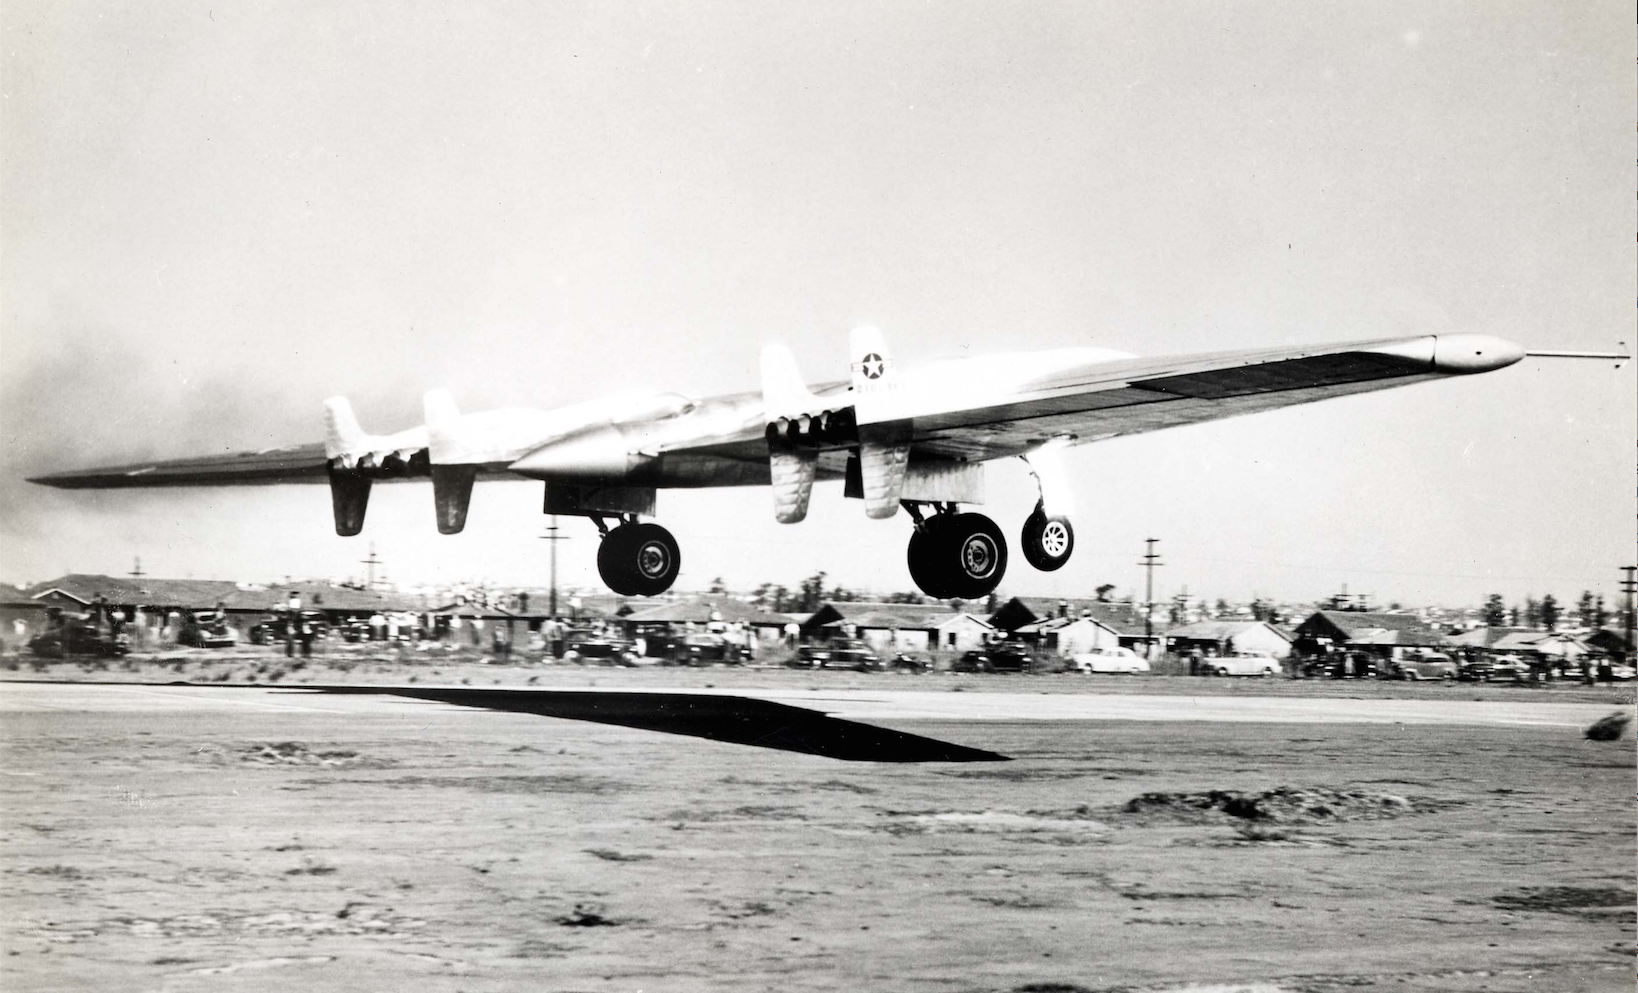 Northrop YB-49 42-102367 takes off from Northrop Field, Hawthorne California. Note teh crowds of onlookers and residential housing along W. 120th Street, on the north side of the airport. (U.S. Air Force)